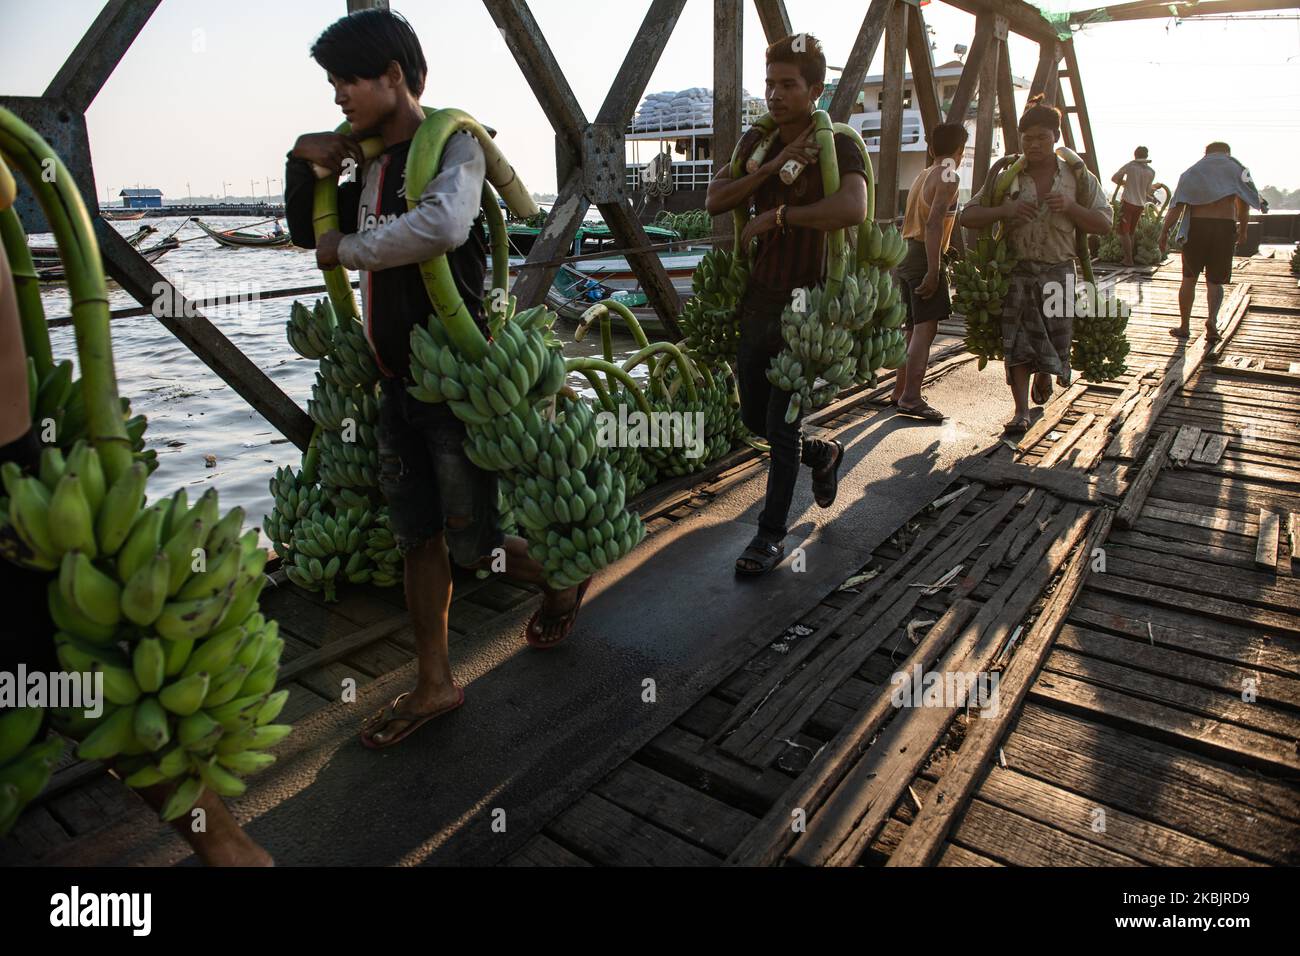 People carry bananas unloaded from a boat at a jetty in Yangon, Myanmar on March 10, 2020. (Photo by Shwe Paw Mya Tin/NurPhoto) Stock Photo